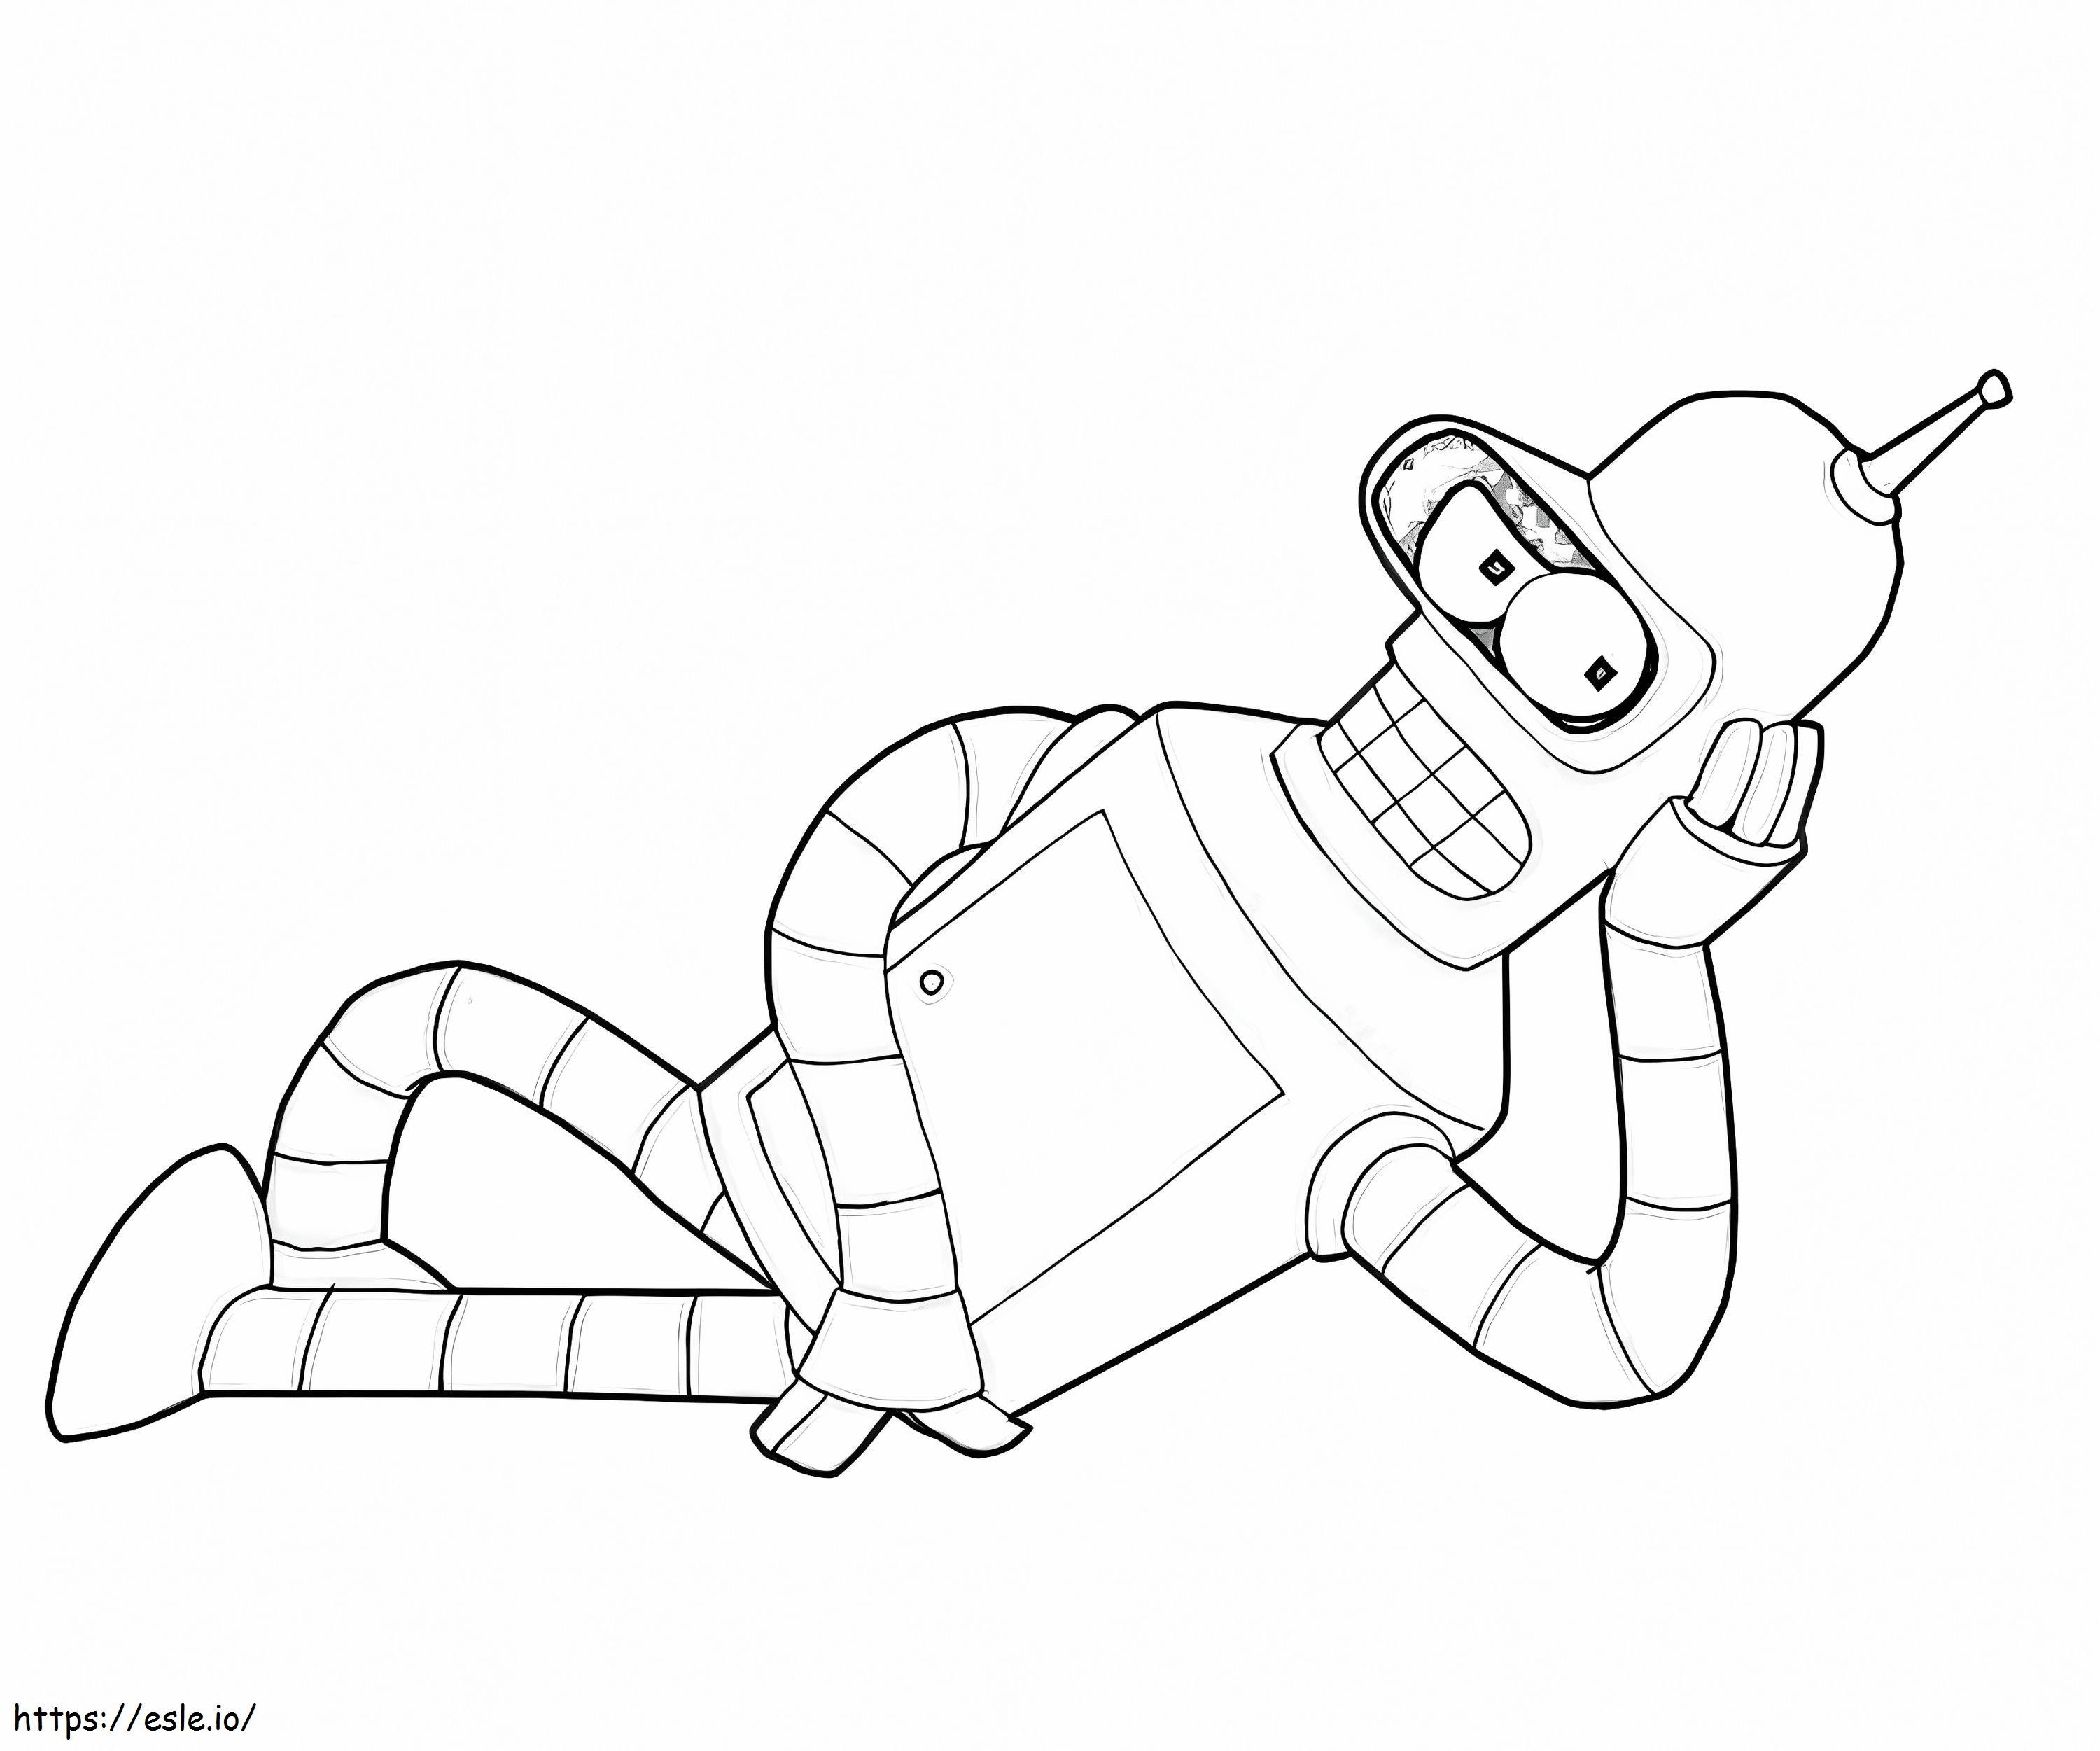 Bender 1 coloring page